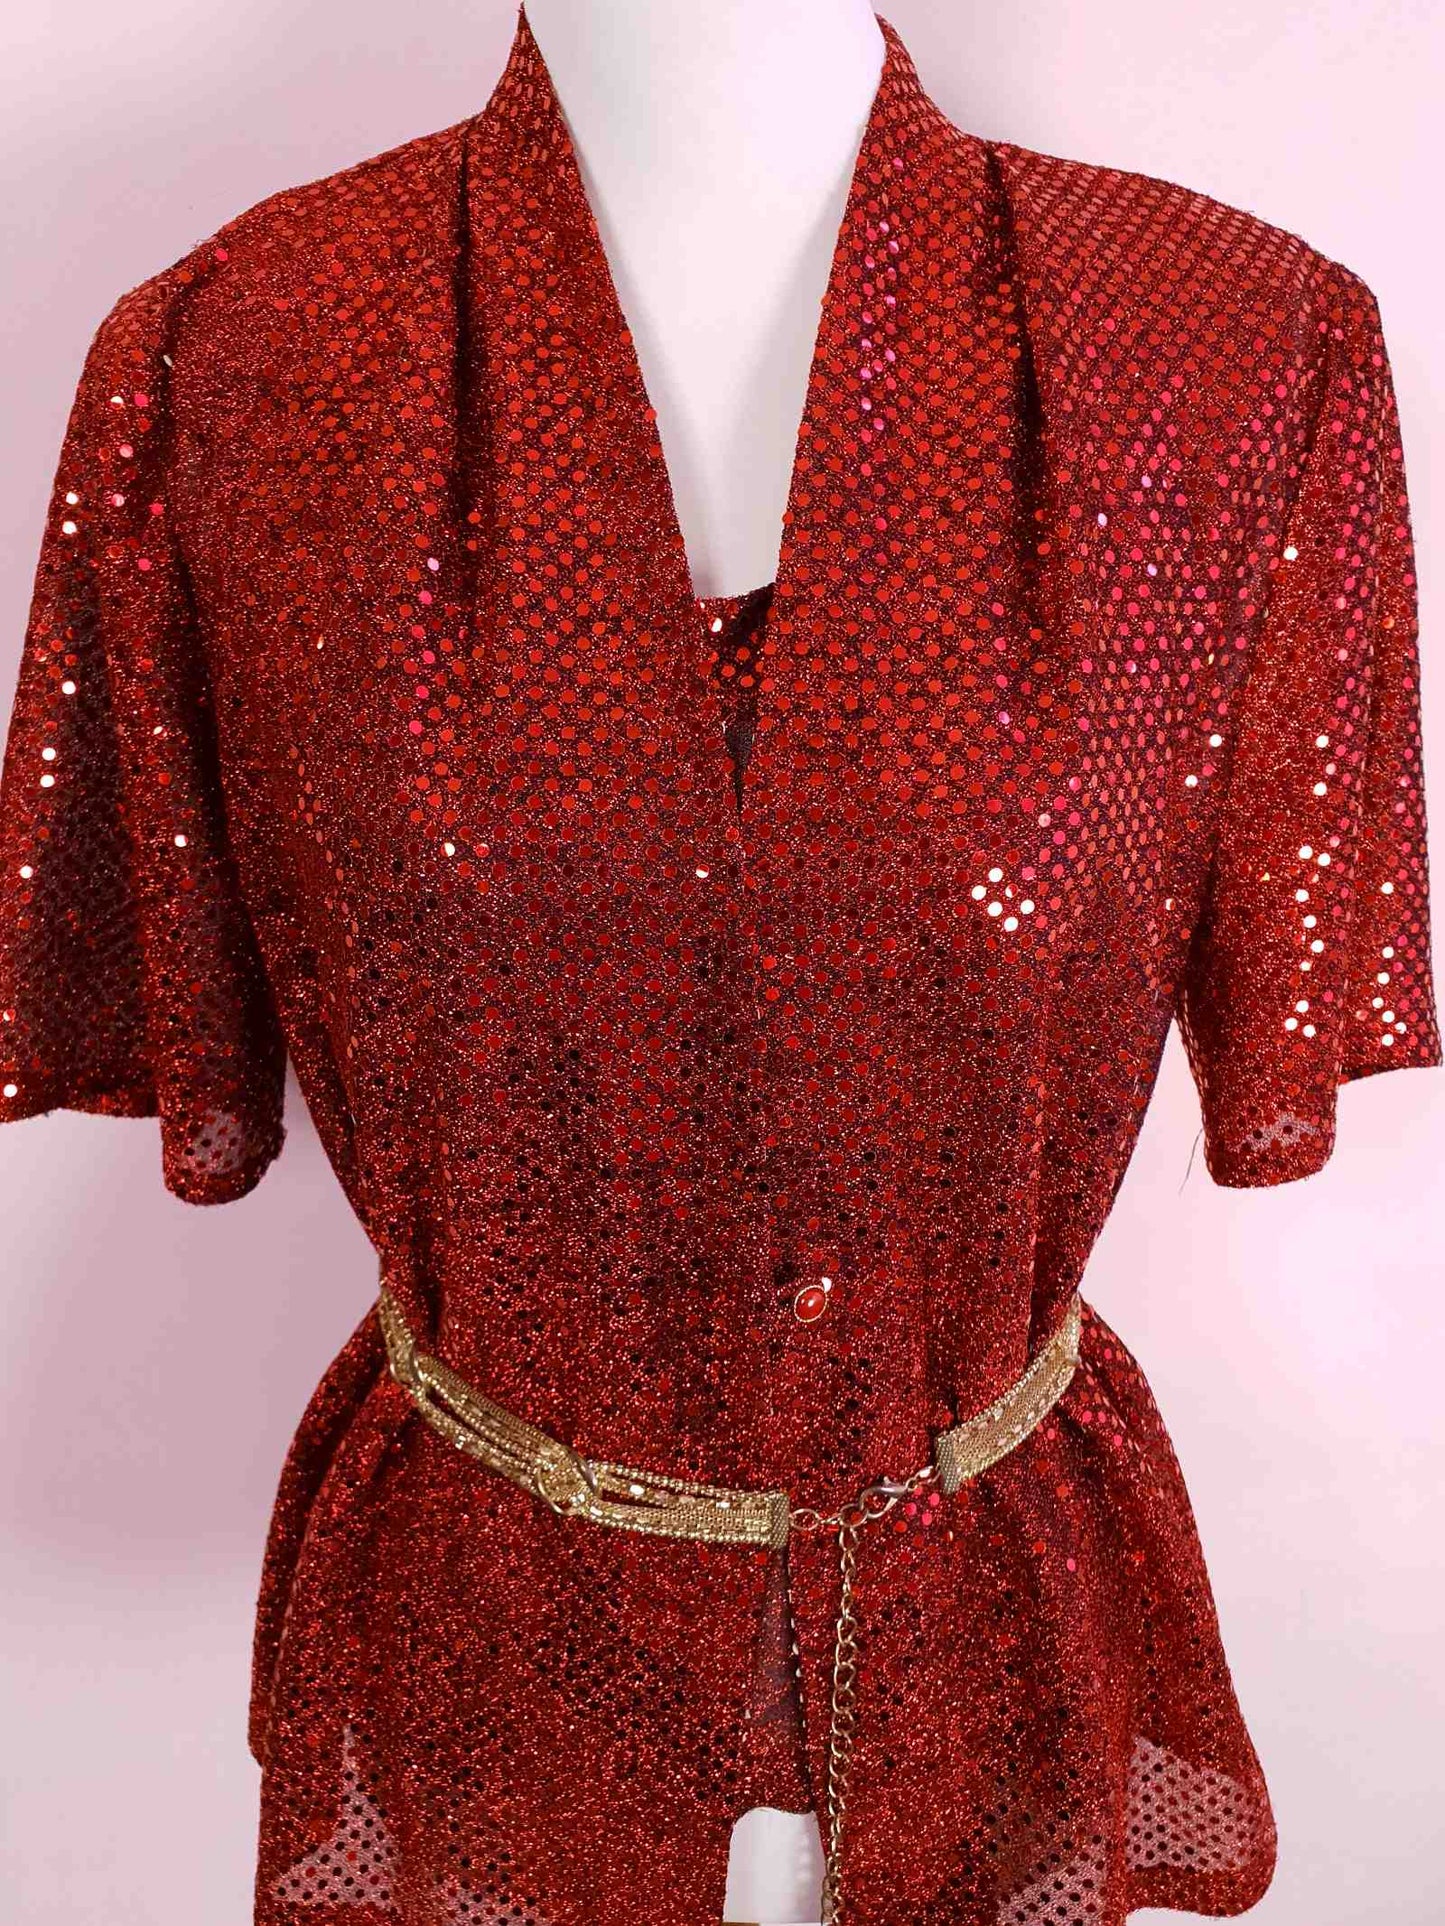 Dazzling Vintage 1980s Red Sparkly Glitter Sequin Top - Oversize